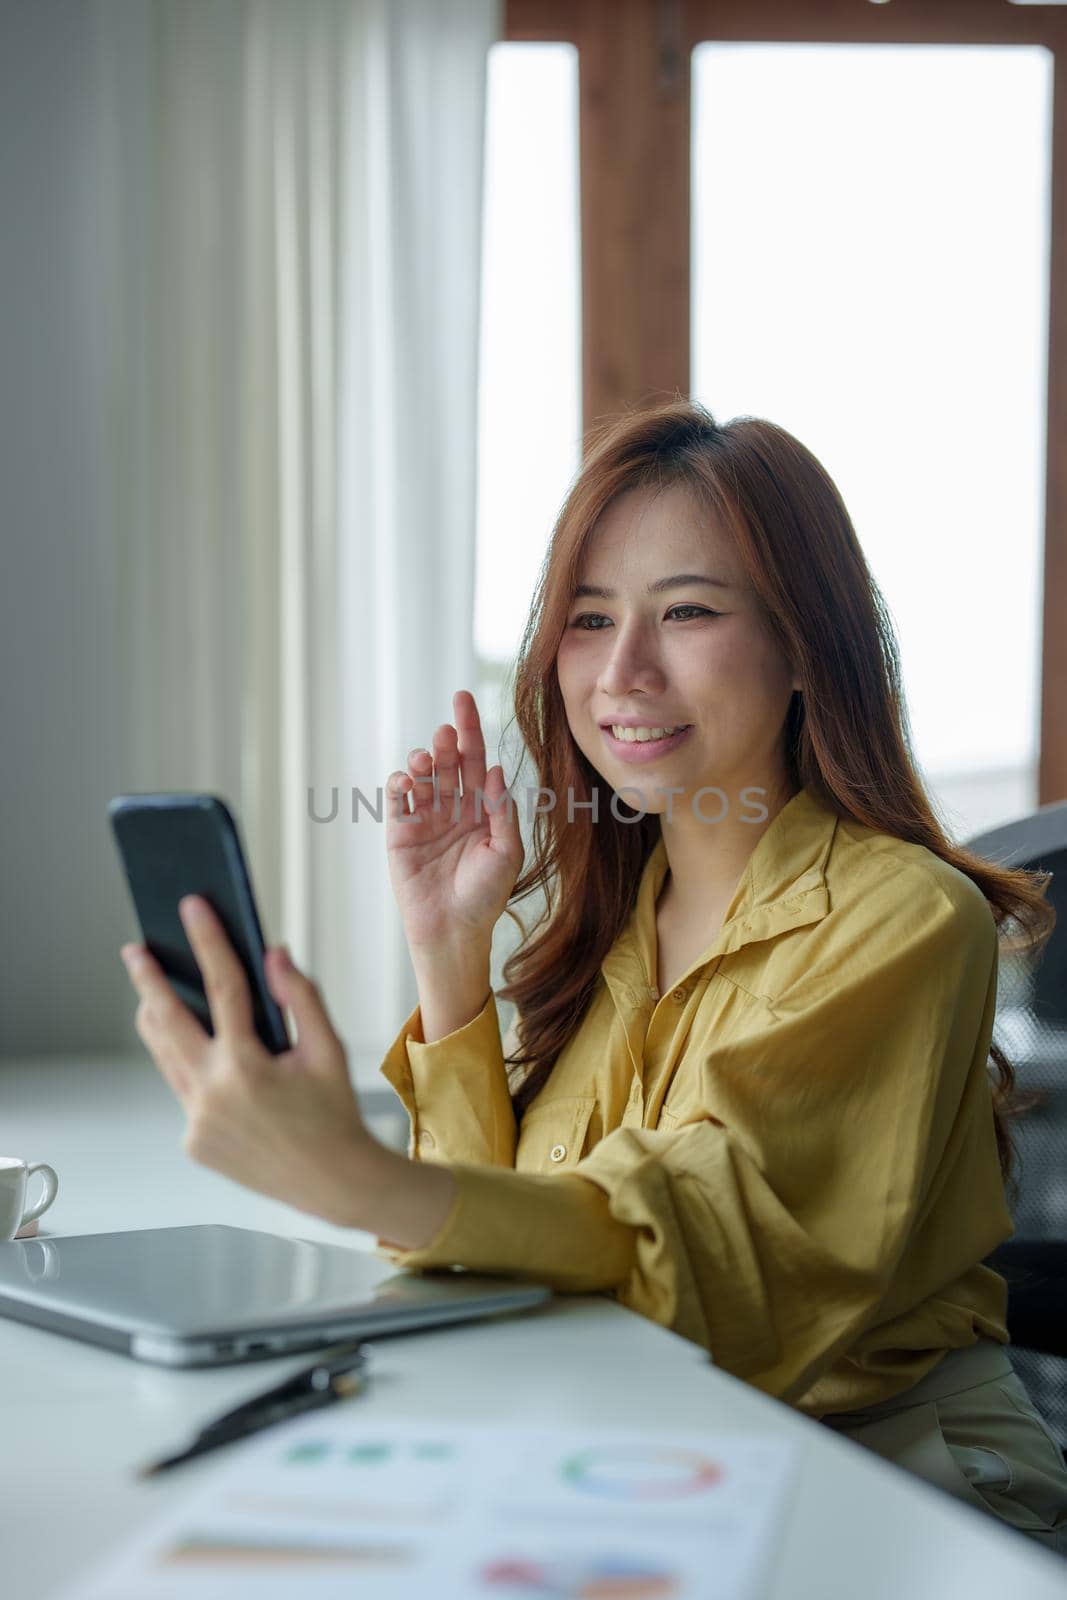 Portrait of a woman using her phone to make video calls or call a friend while taking a break at her desk by Manastrong